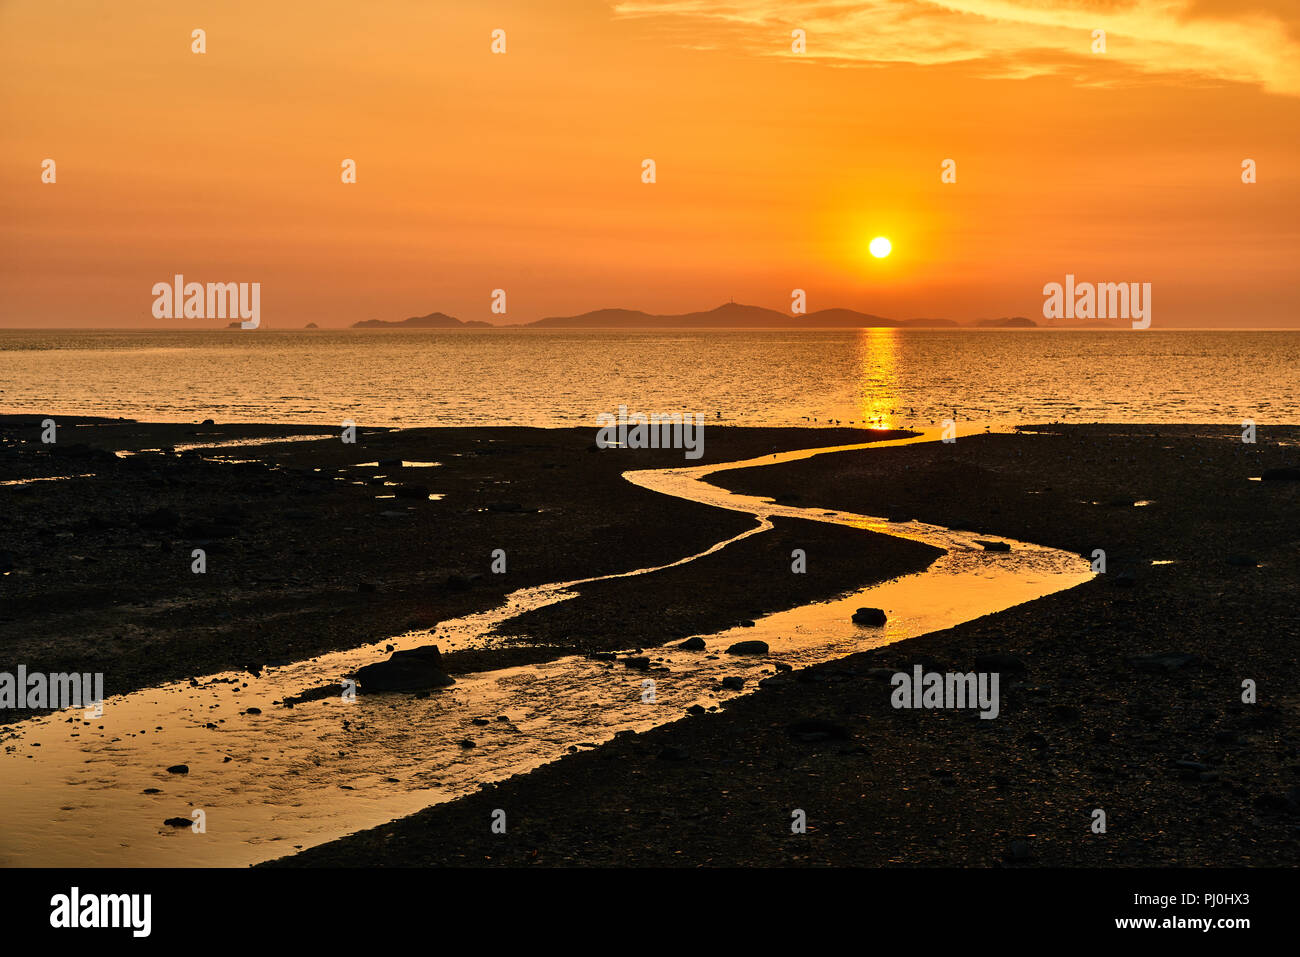 Sunset with mudflat and tidal channel at Ganghwado Janghwa-ri sunset viewing point, Inchoen, Korea. Stock Photo